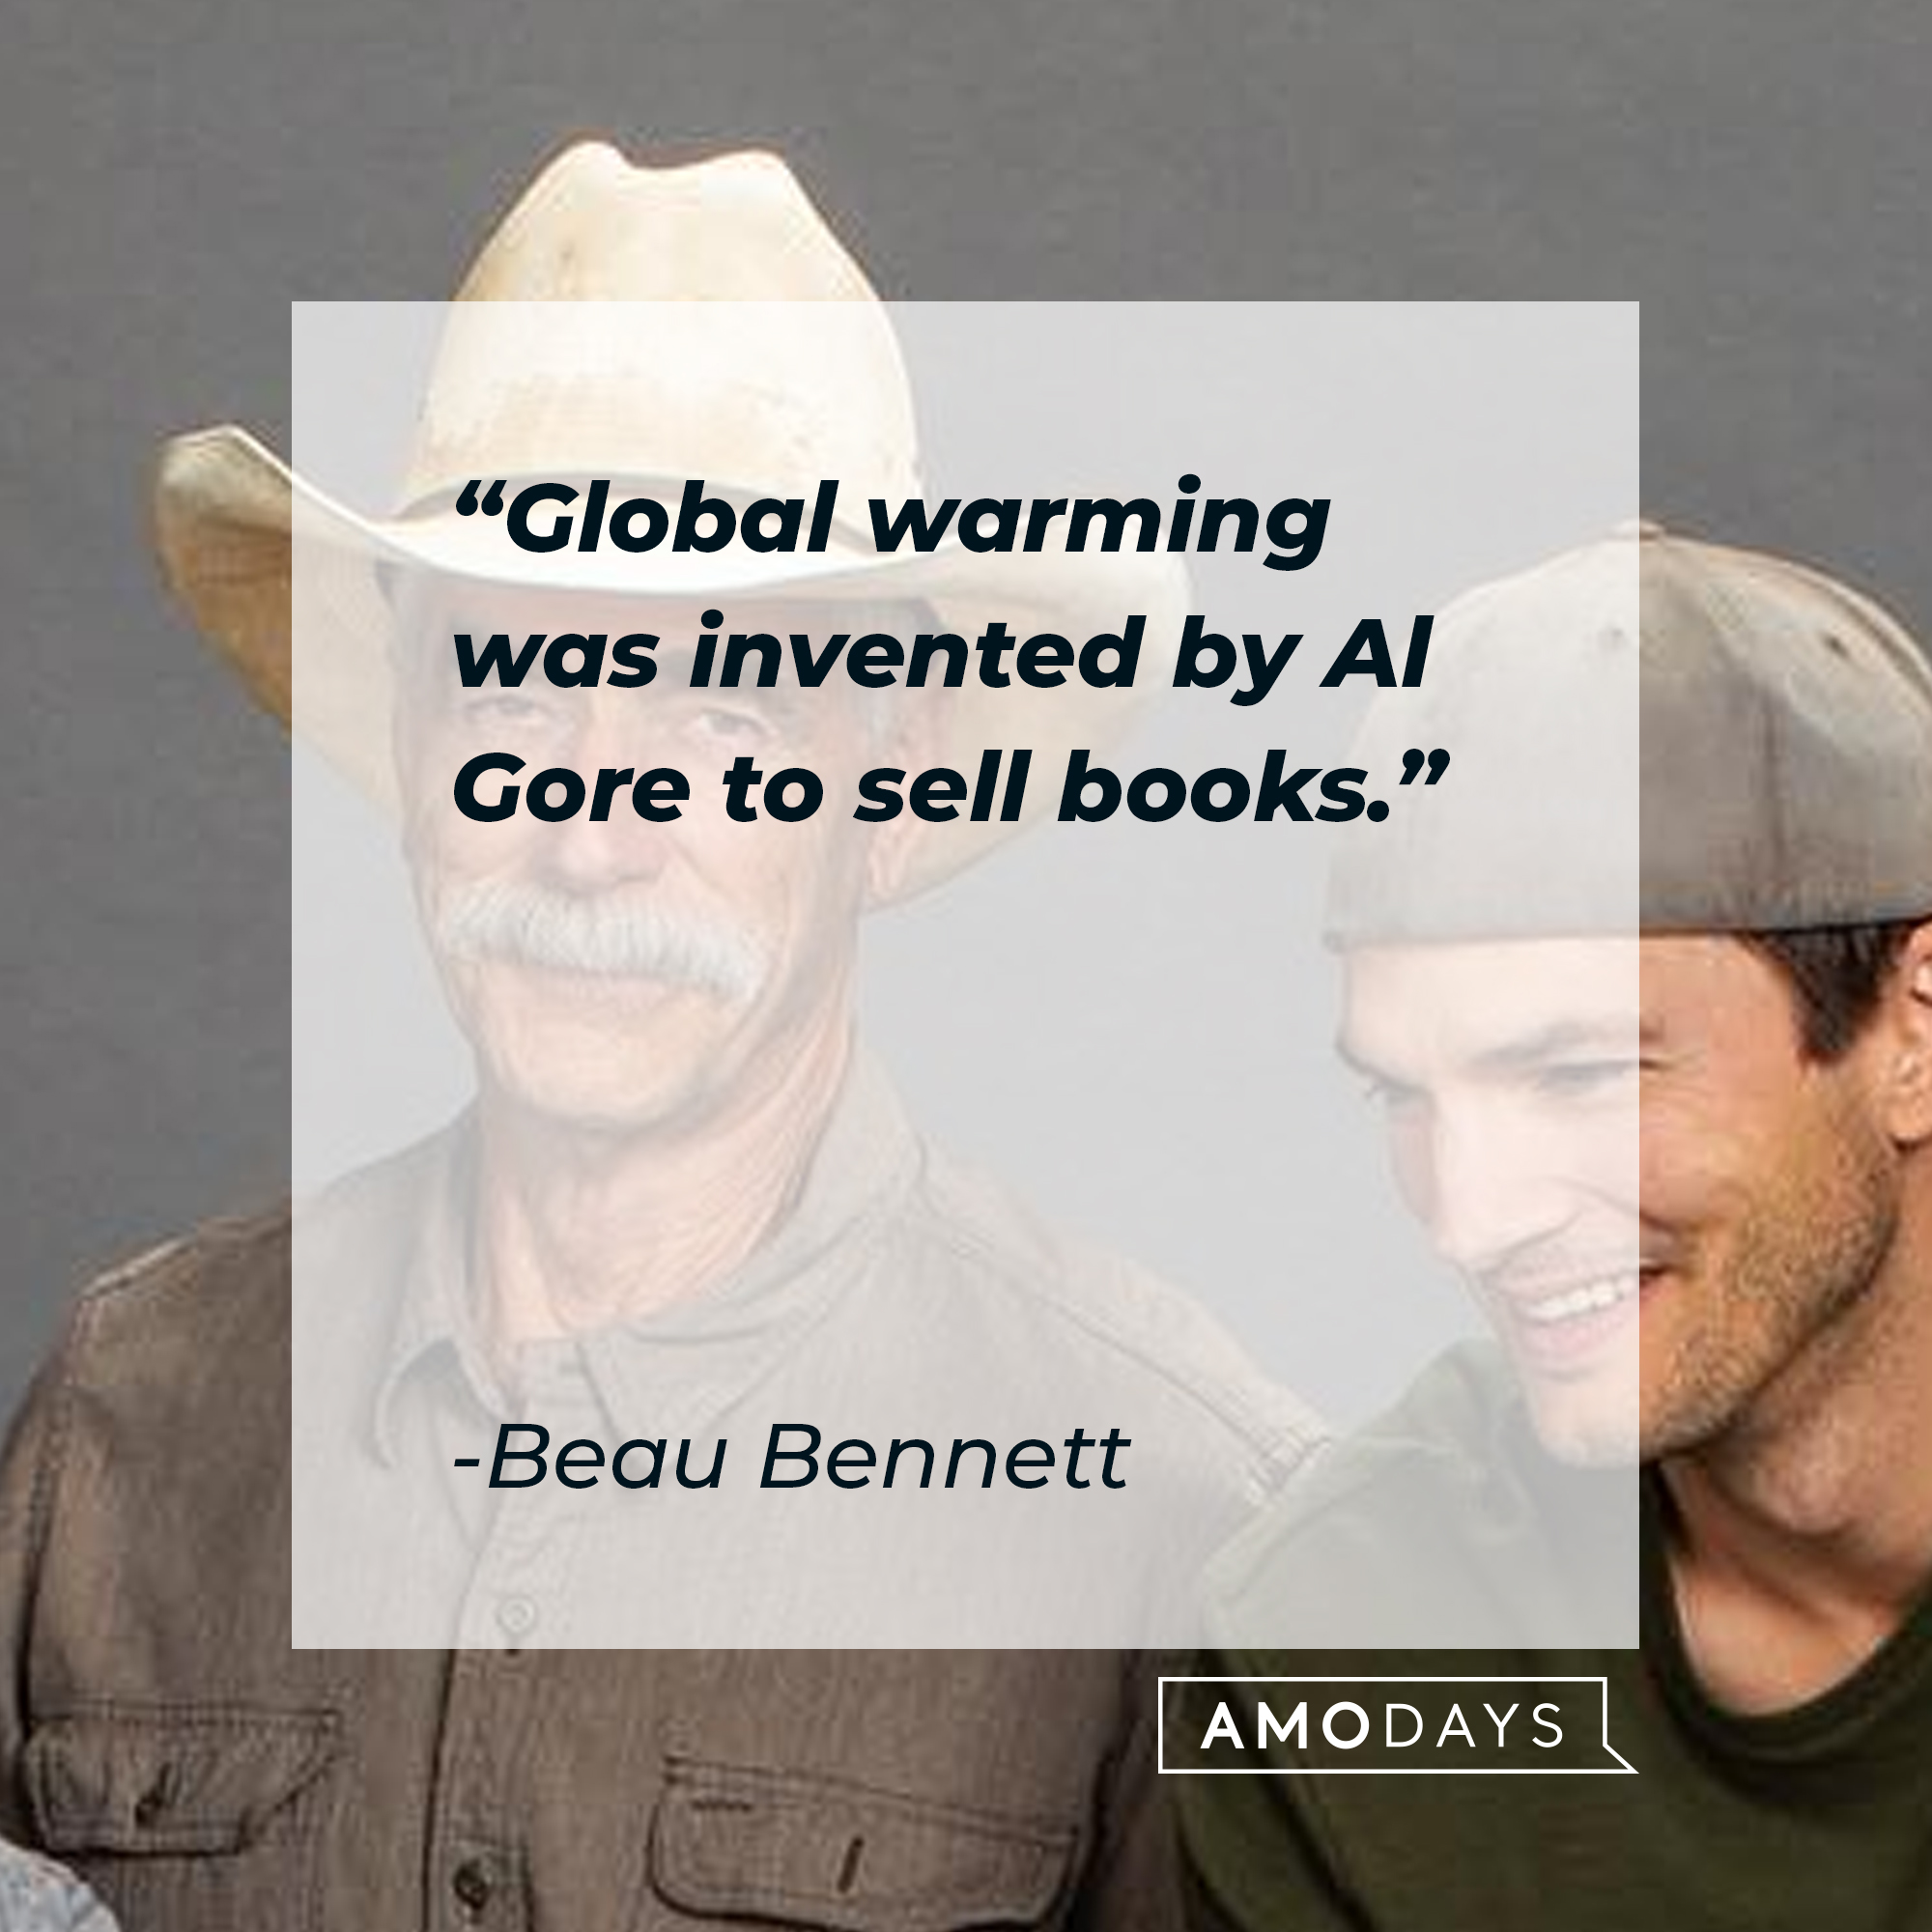 Beau Bennett and one of his sons, with his quote: “Global warming was invented by Al Gore to sell books.” | Source: facebook.com/TheRanchNetflix